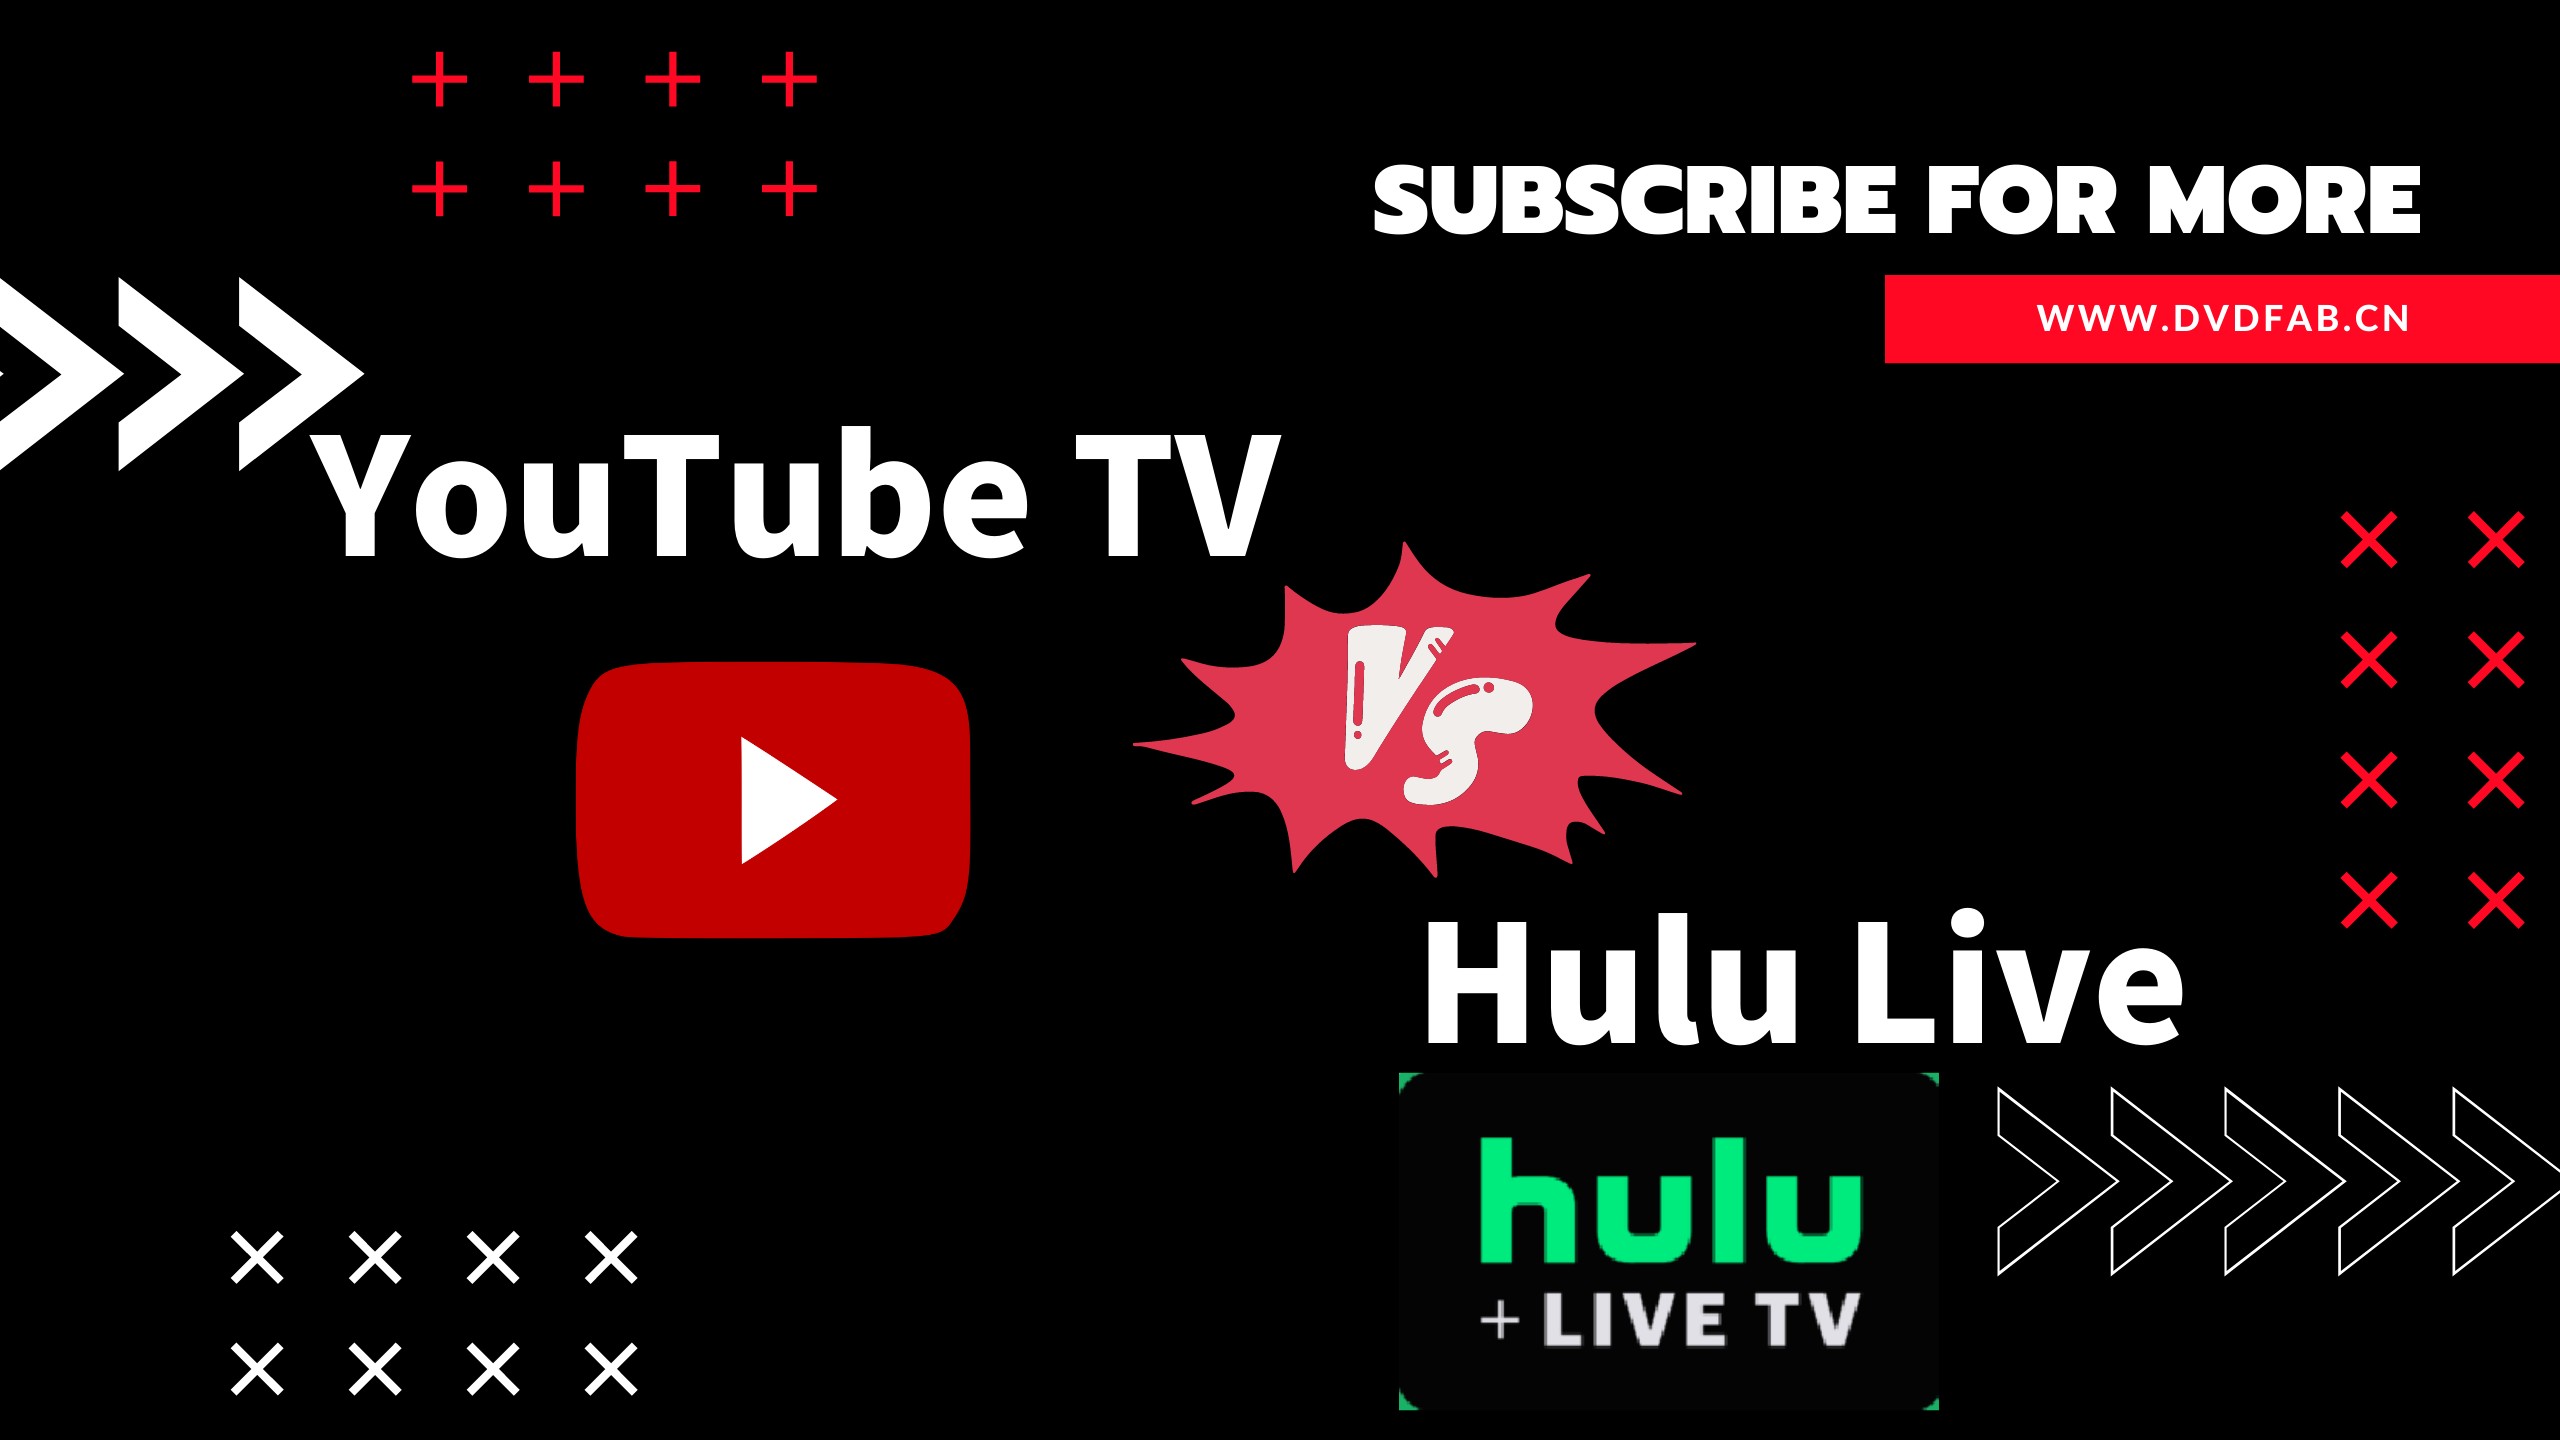 Streaming services face-off YouTube TV vs Hulu Live